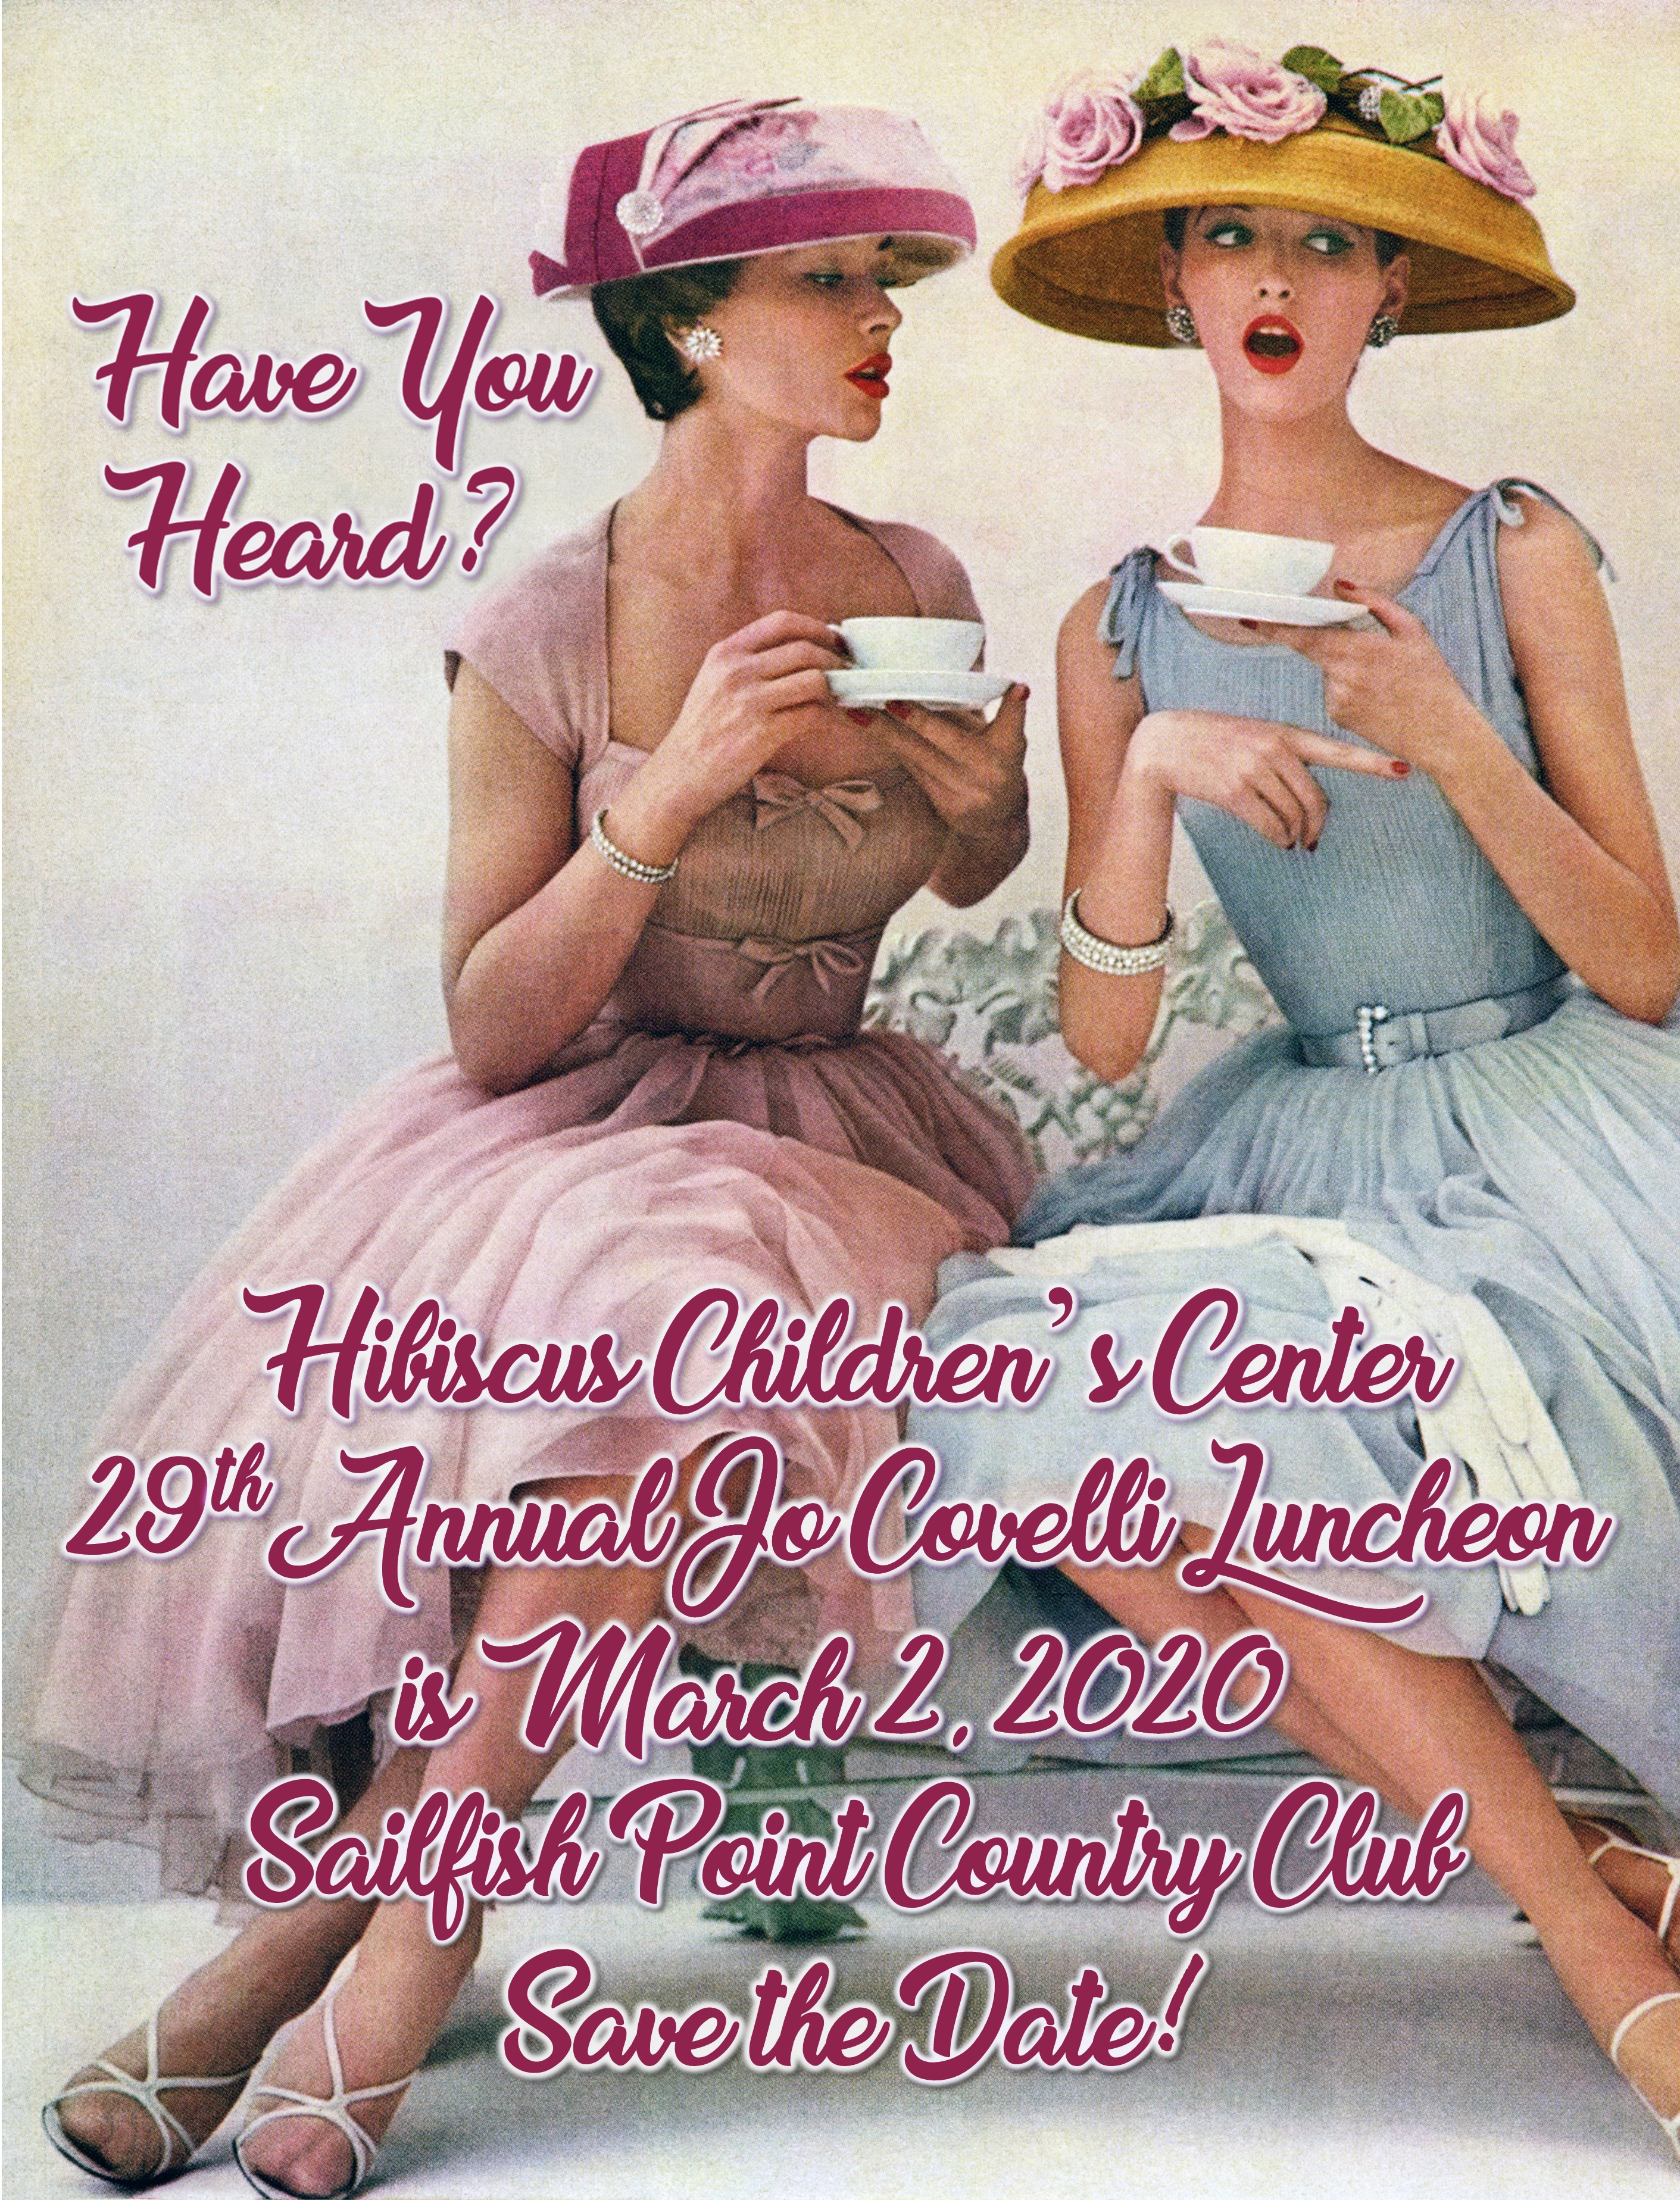 Jo Covelli Luncheon Save the Date